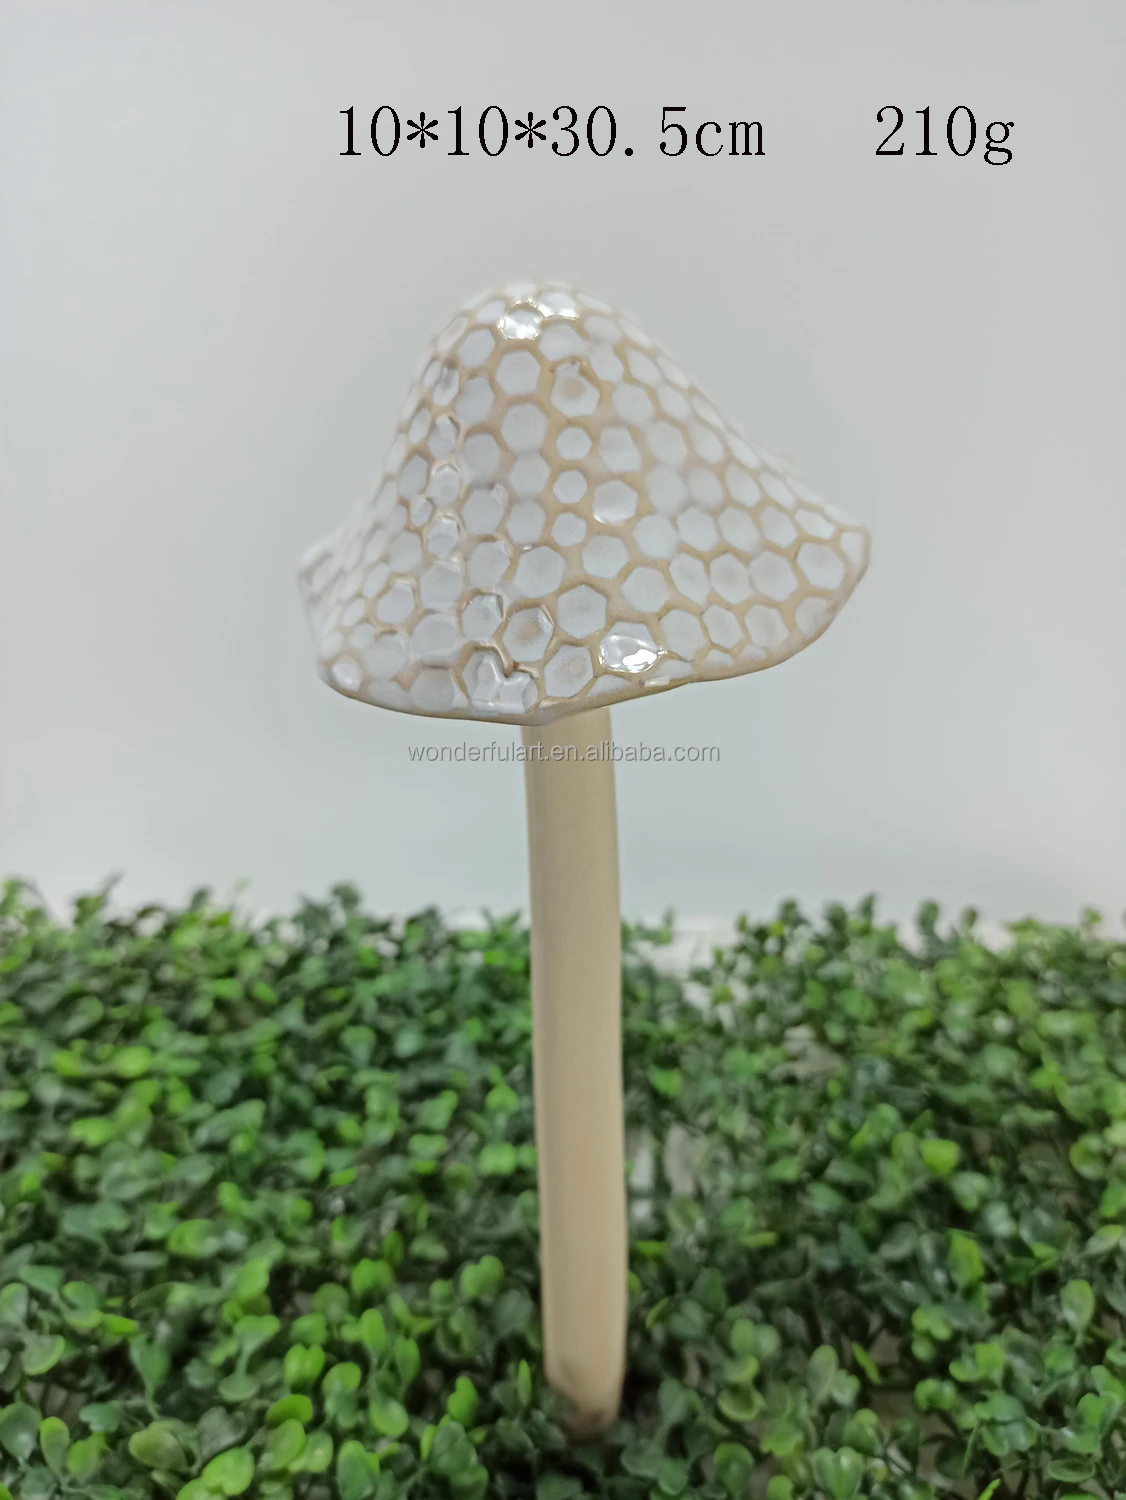 Hot Sell Decorative Ceramic Mushroom Shaped Garden Stakes for Pathway Patio Outdoor Garden Decoration